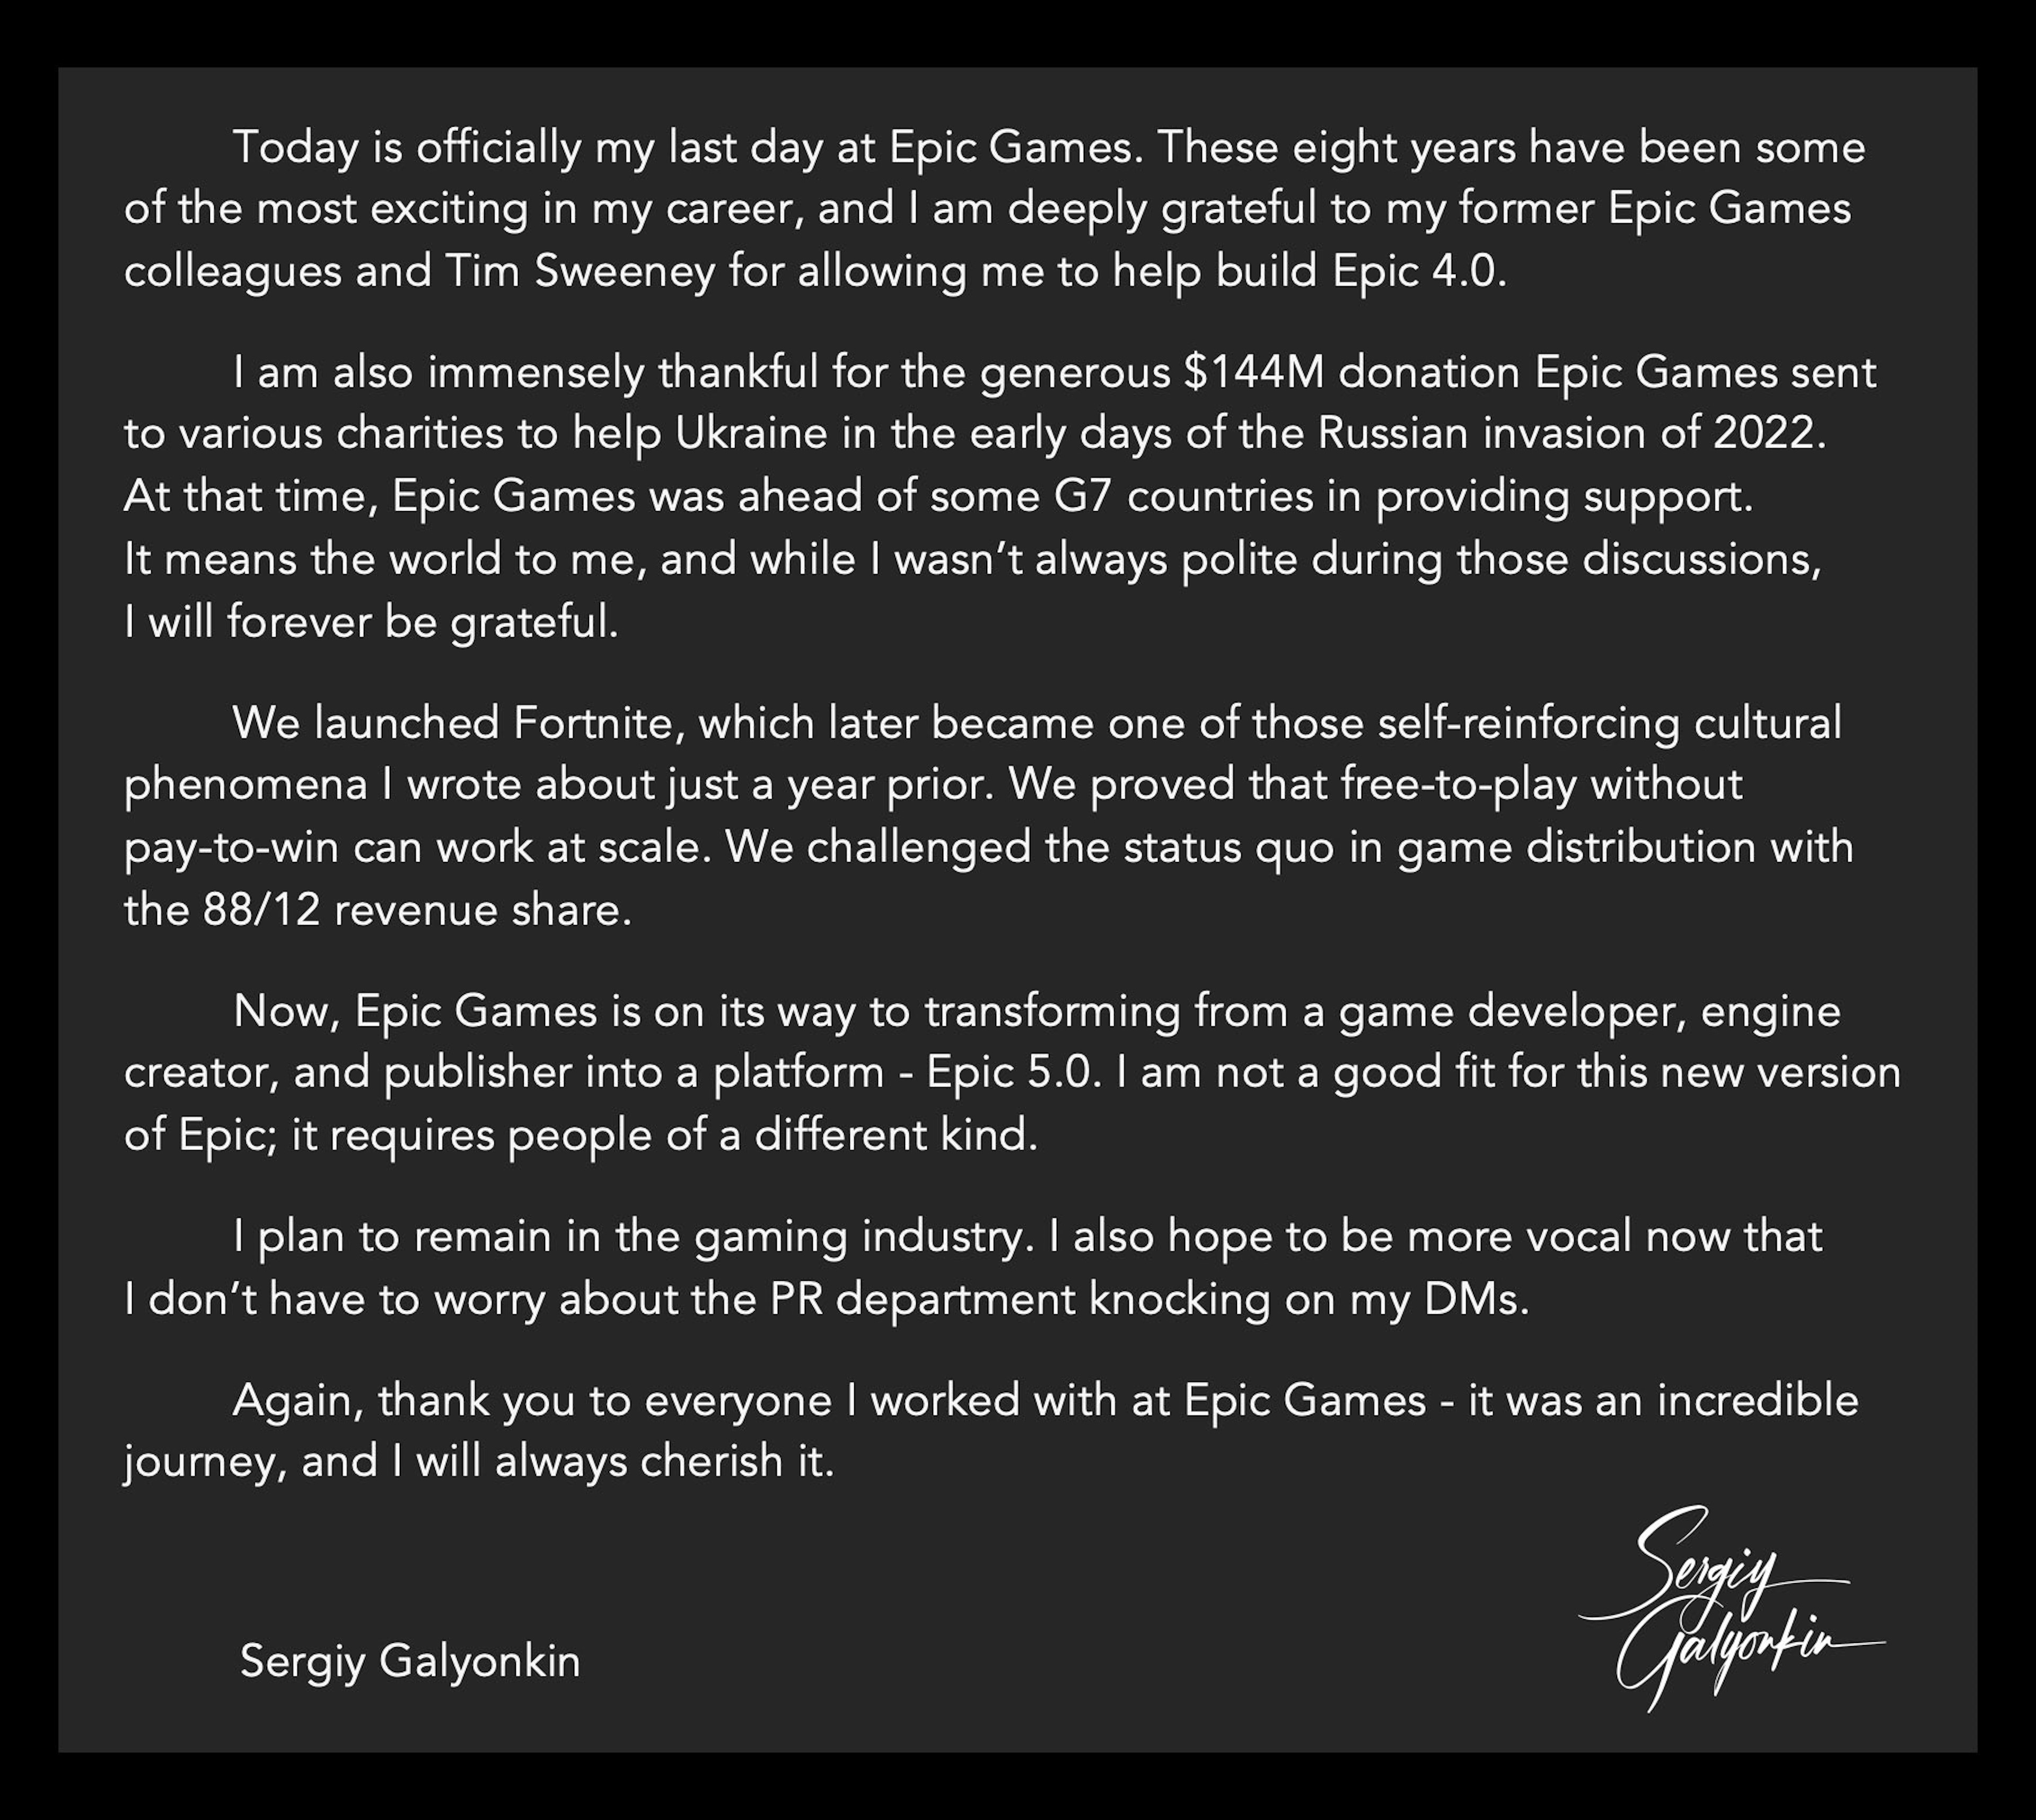 Sergiy Galyonkin's message announcing his depature from Epic Games